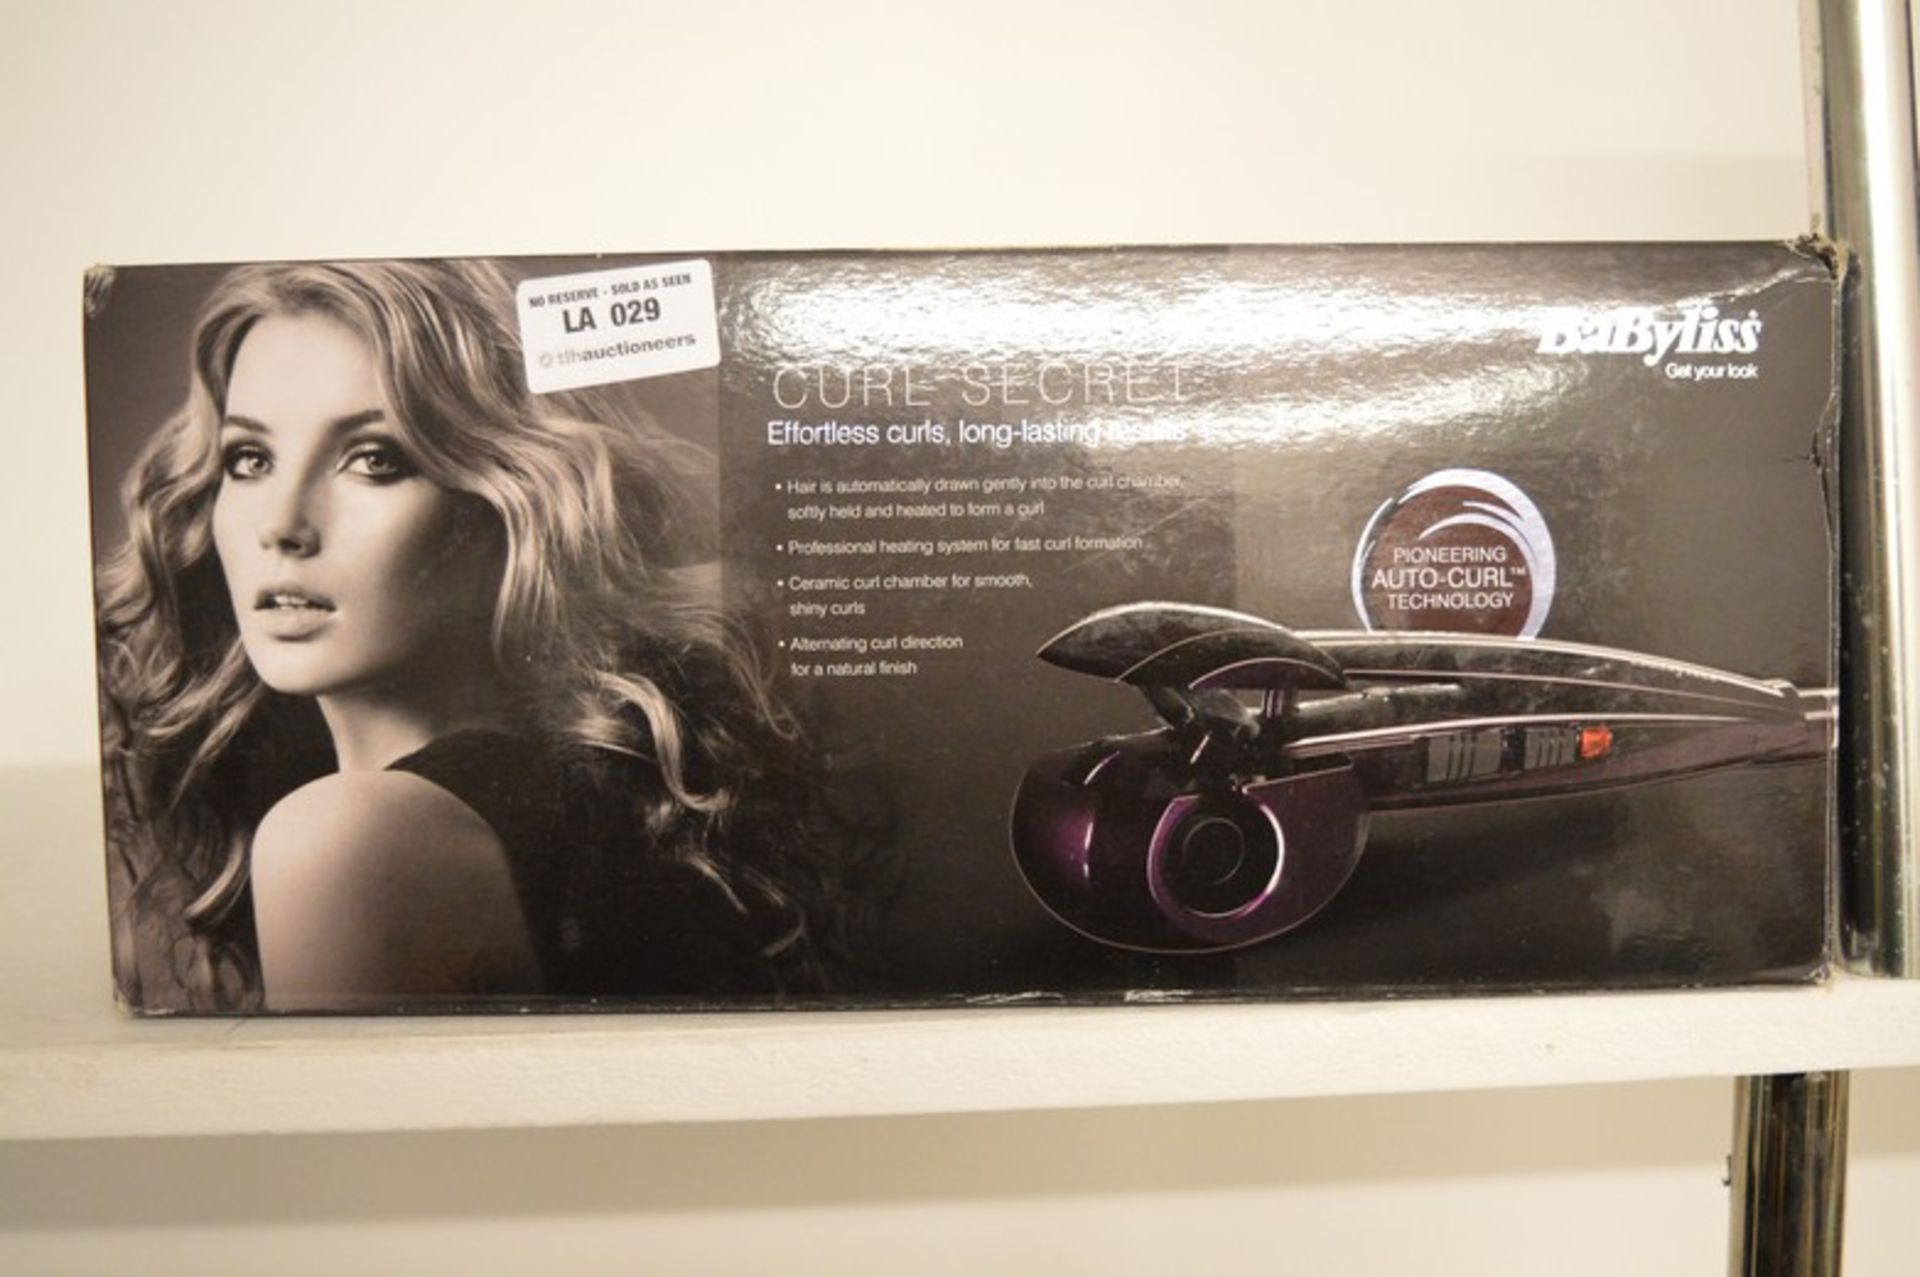 1 x BOXED BABYLISS CURL SECRET HAIR CURLERS RRP £125 31.101.16 *PLEASE NOTE THAT THE BID PRICE IS